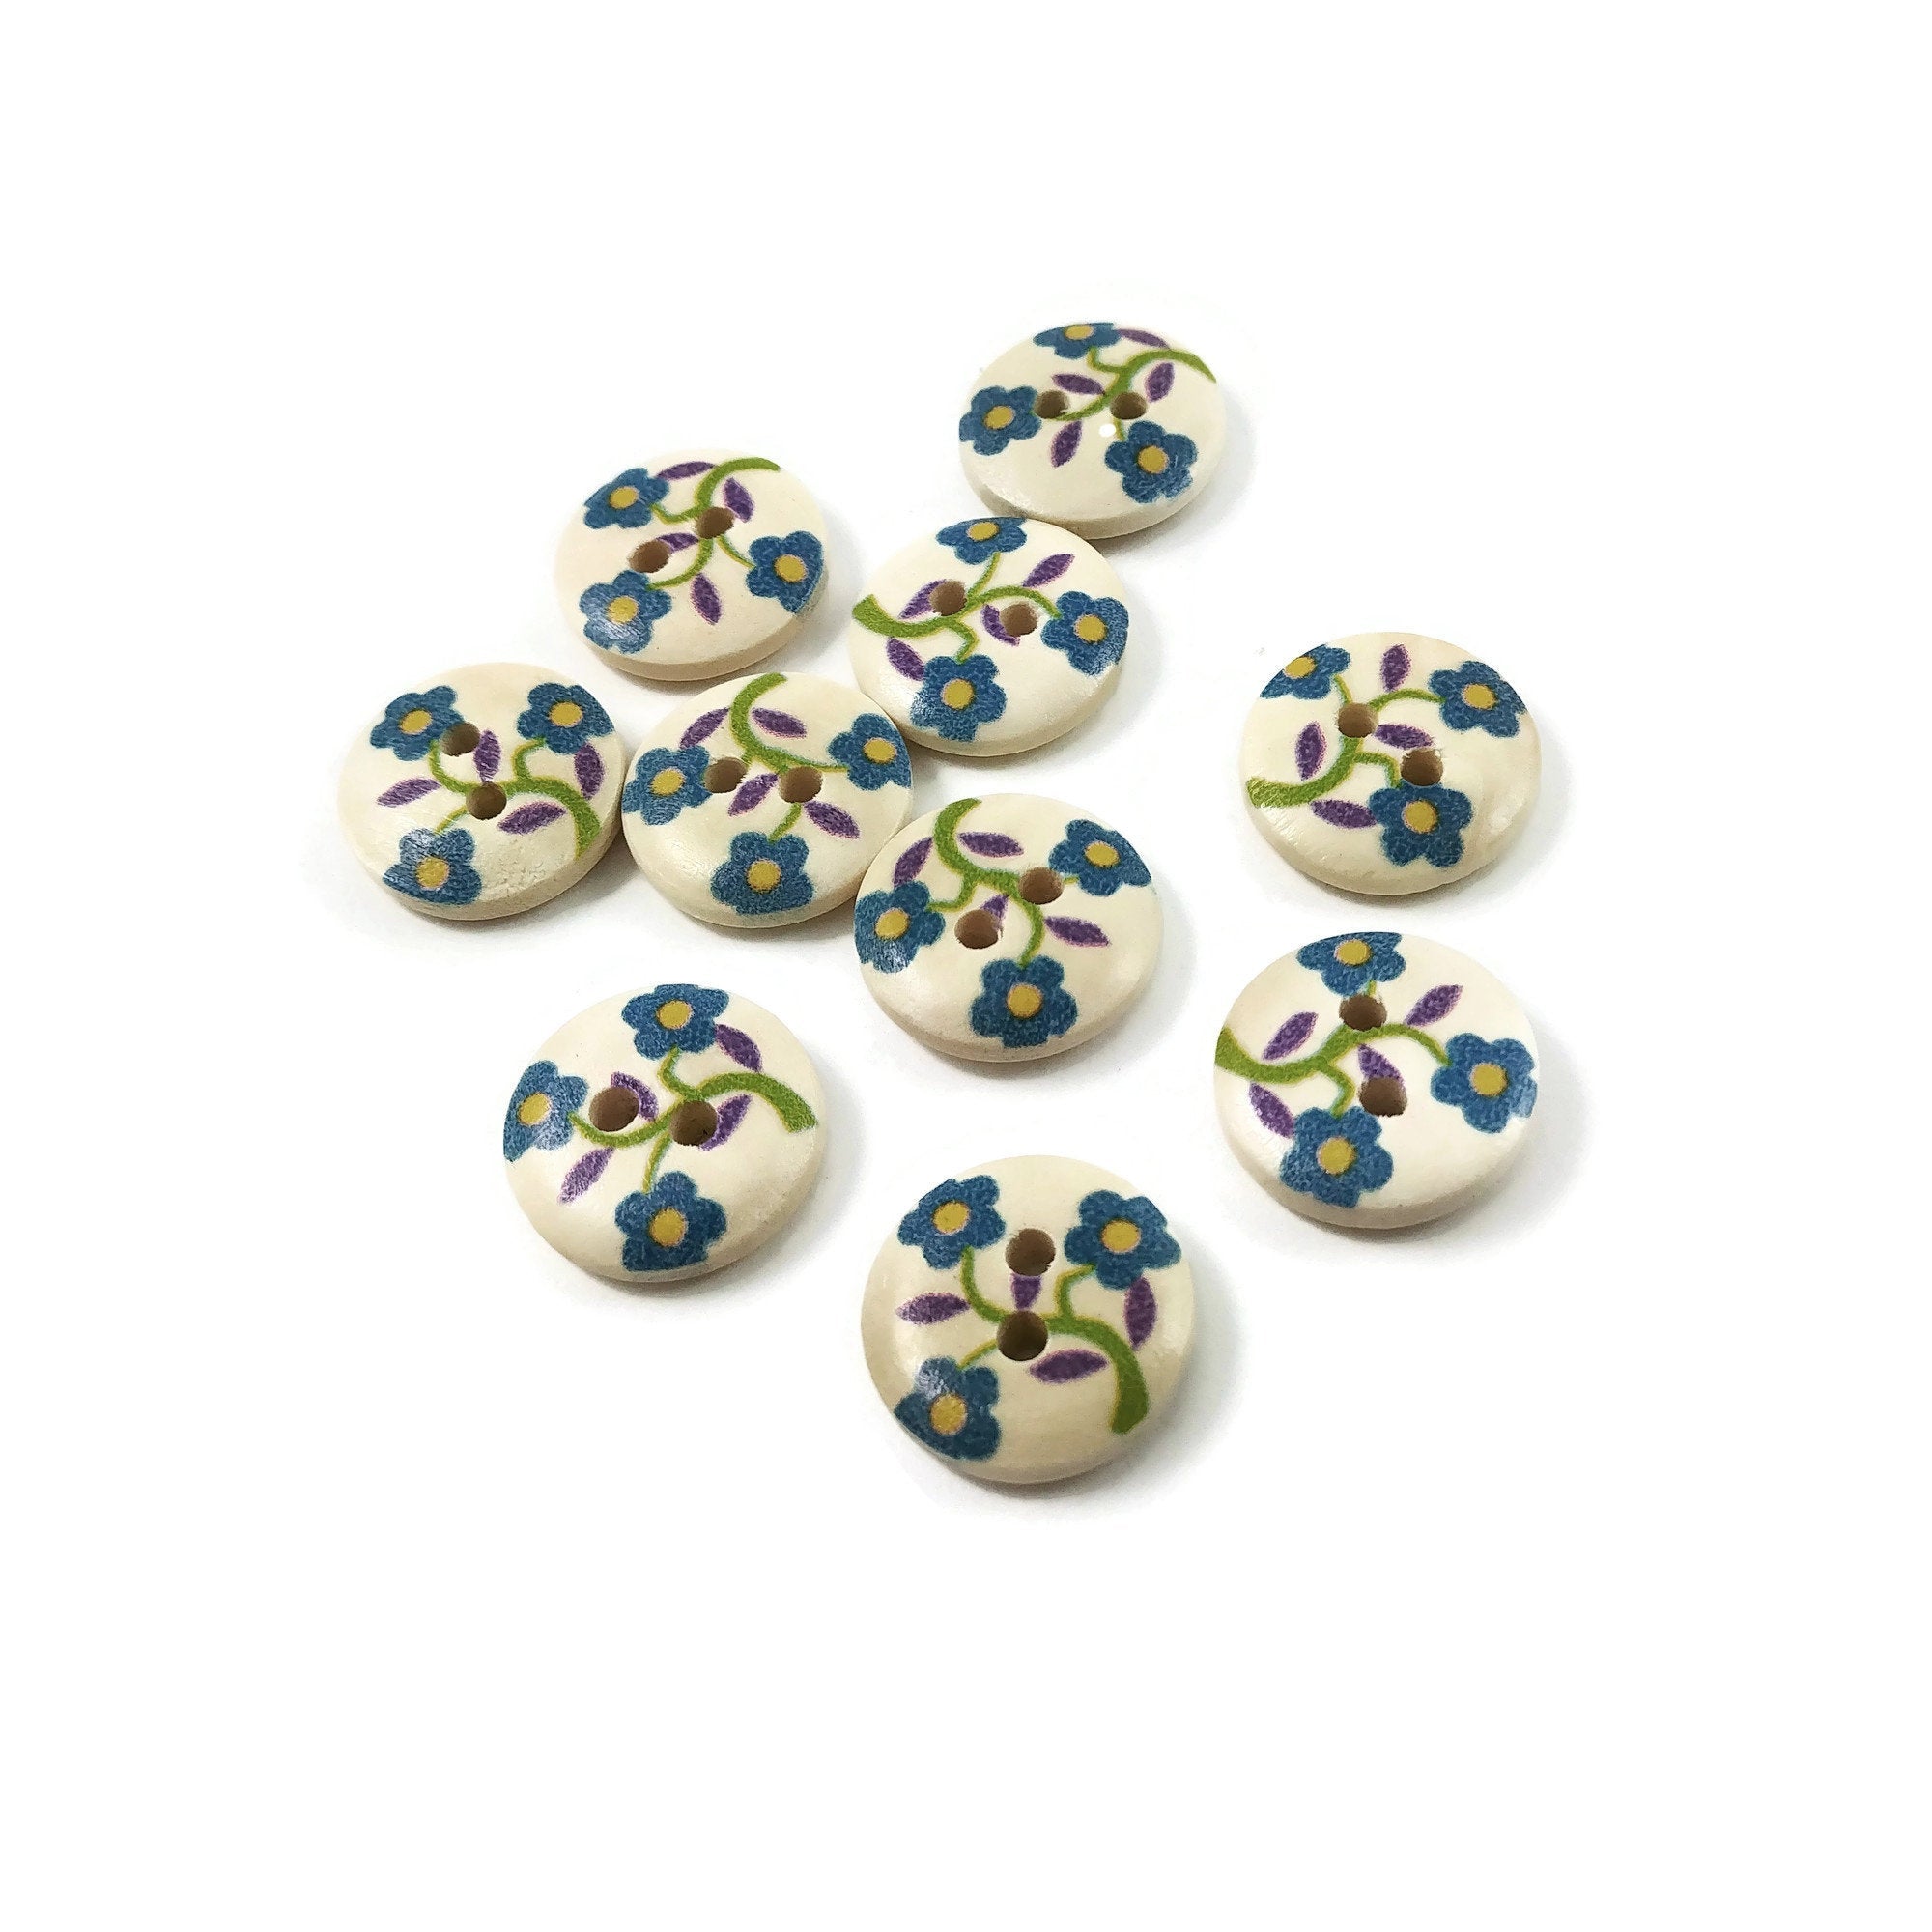 10  Flower wood painted sewing buttons - blue, green and purple 15mm